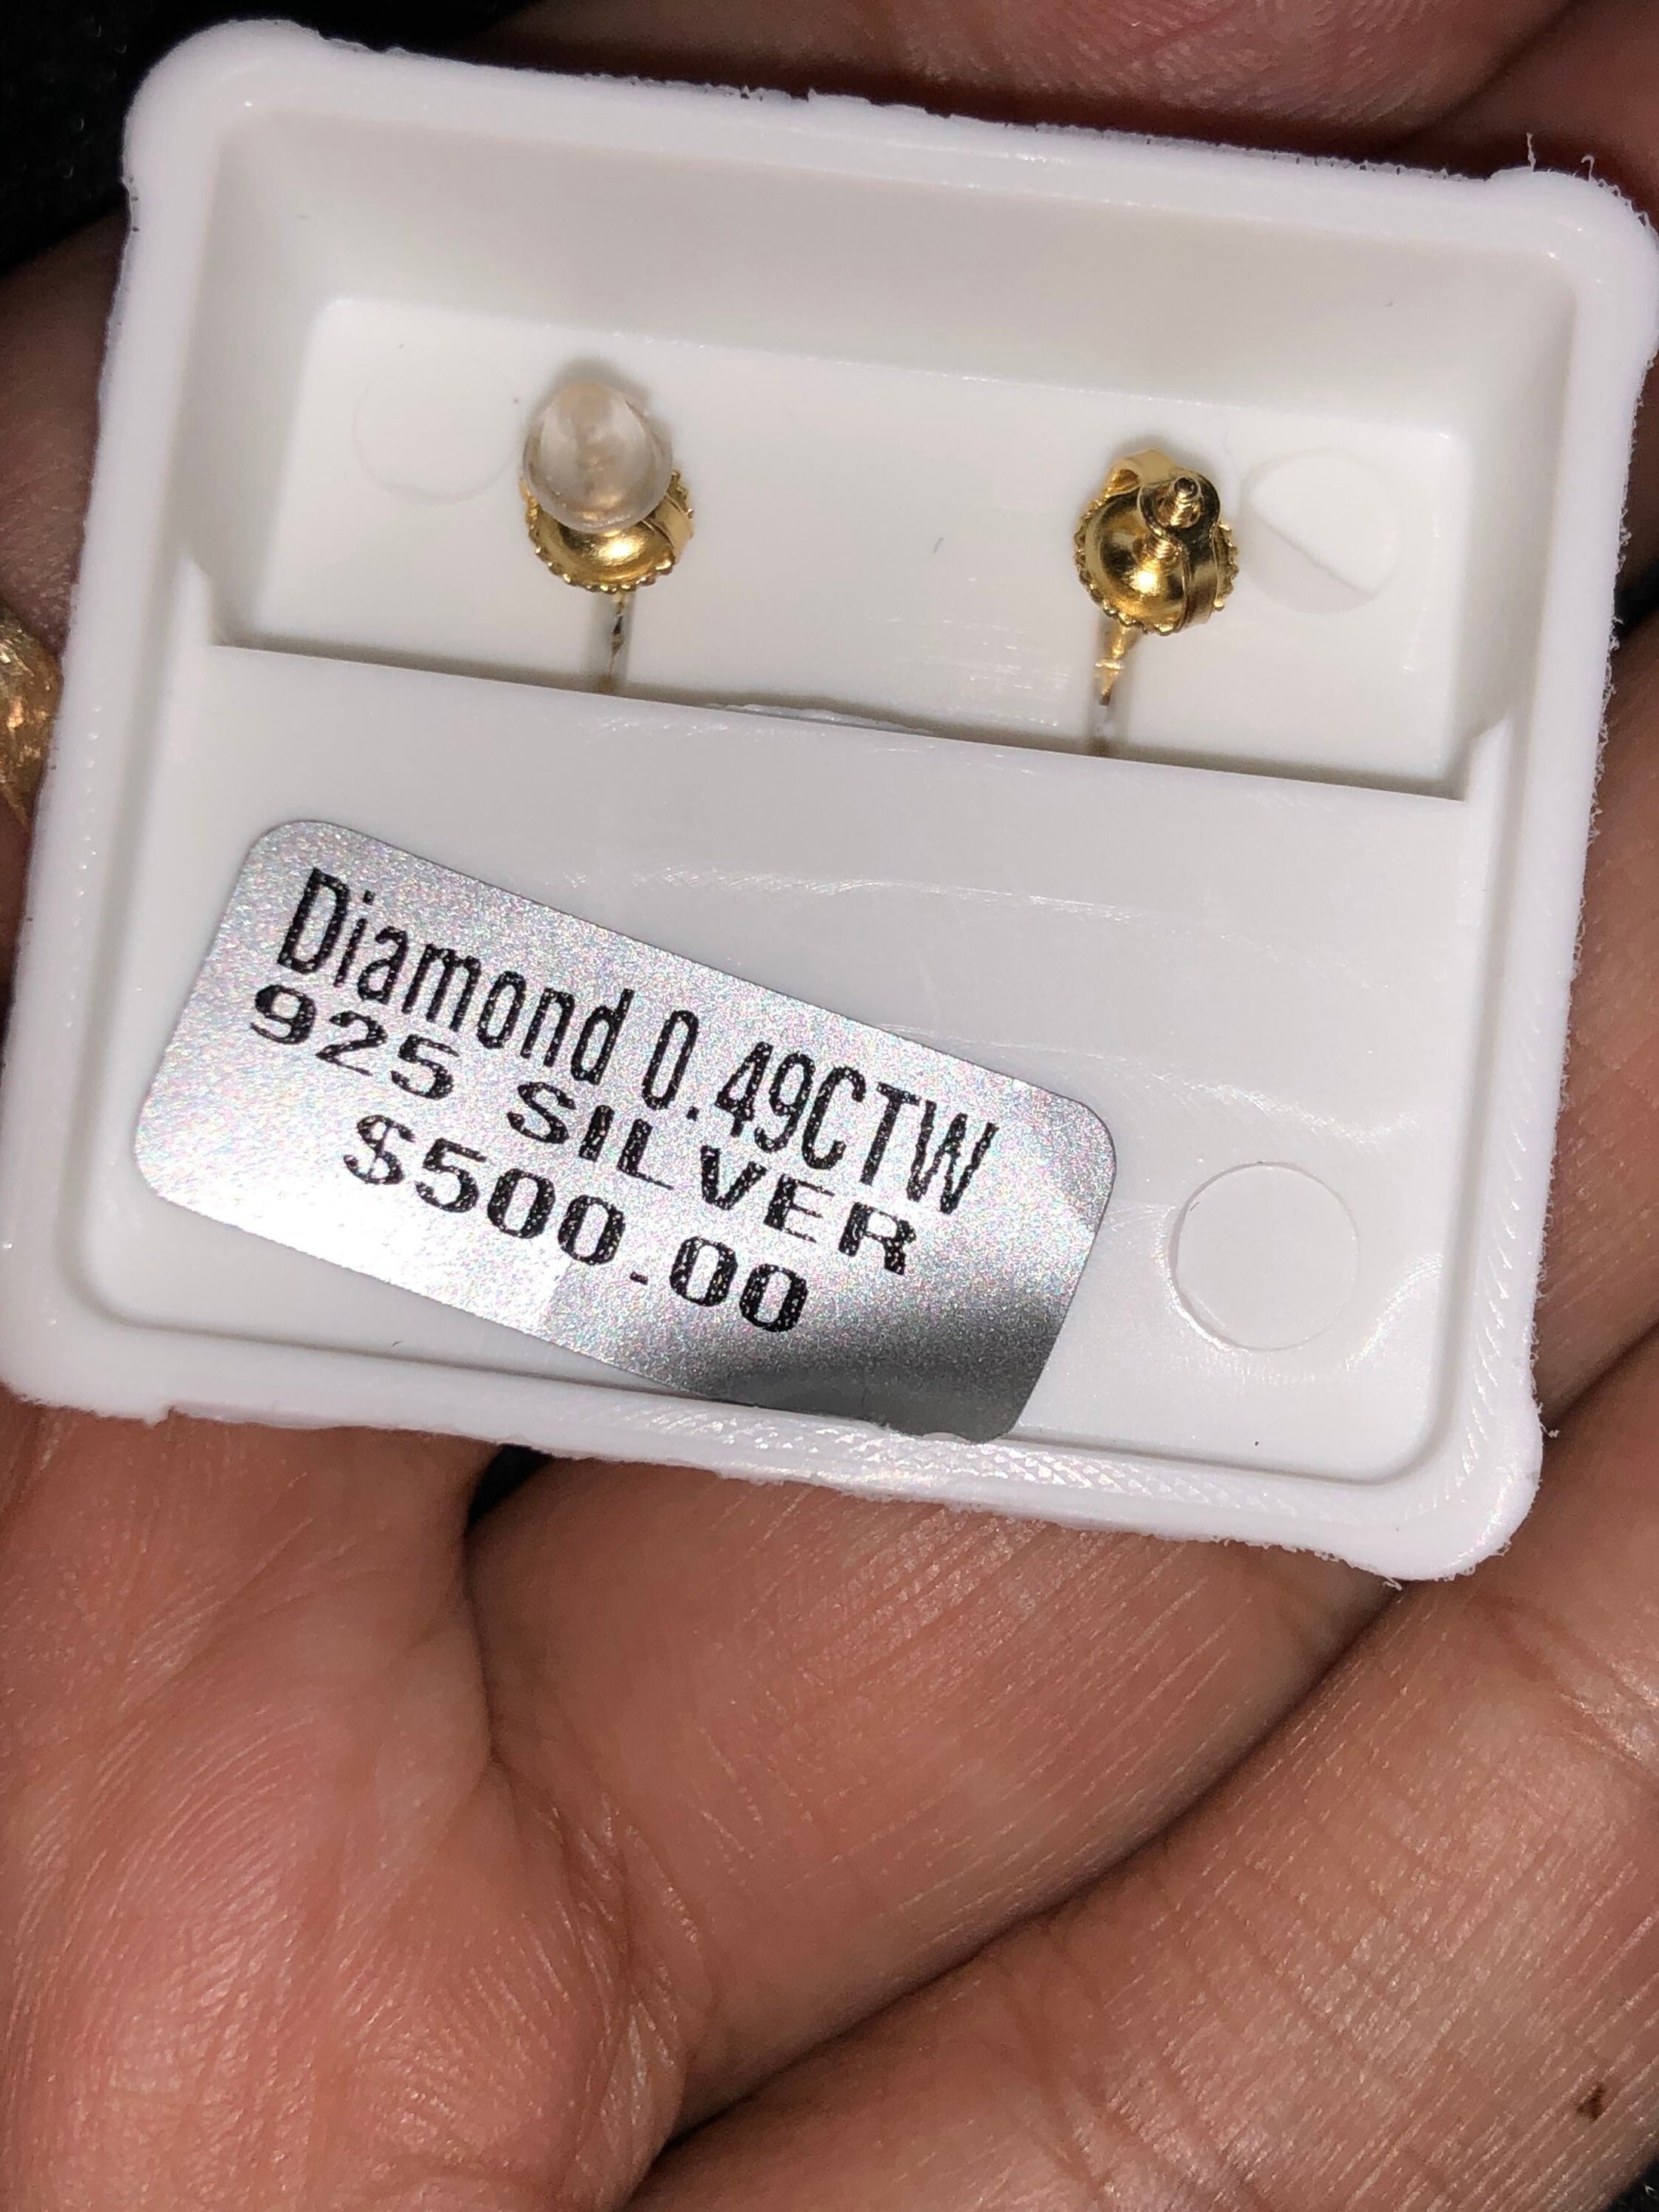 Real diamond earrings not CZ not moissanite comes w/ gift packaging and certificate of authenticity. Huge sale best gift!